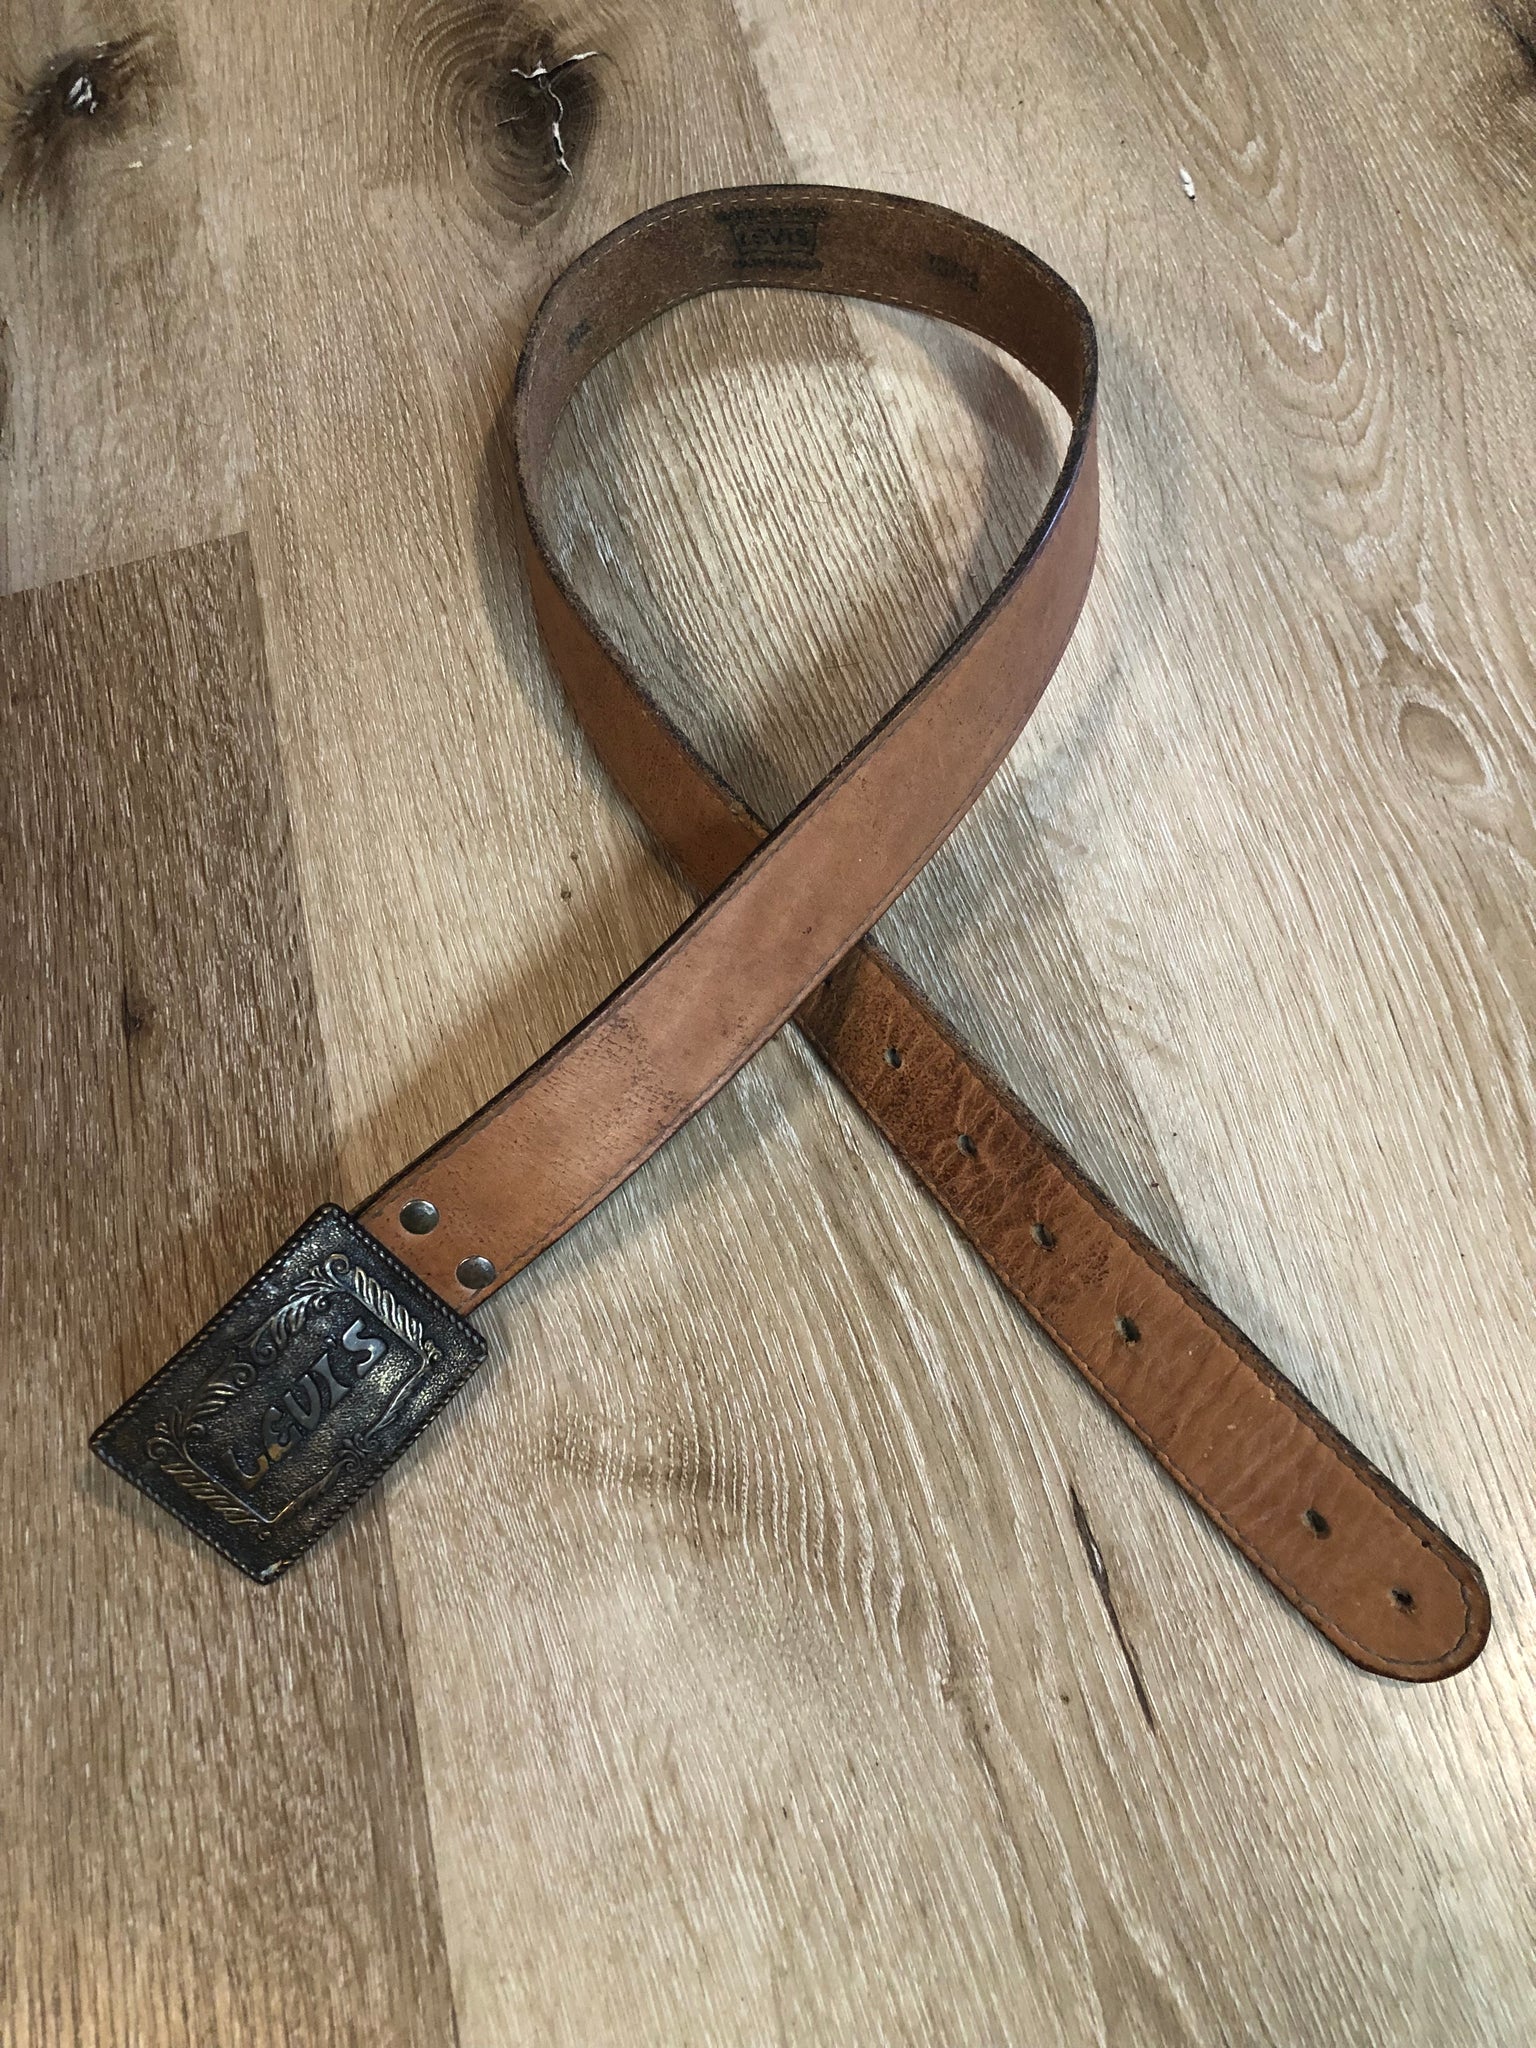 Vintage Levi's Leather Belt with Century Canada Buckle, Made in Canada –  KingsPIER vintage